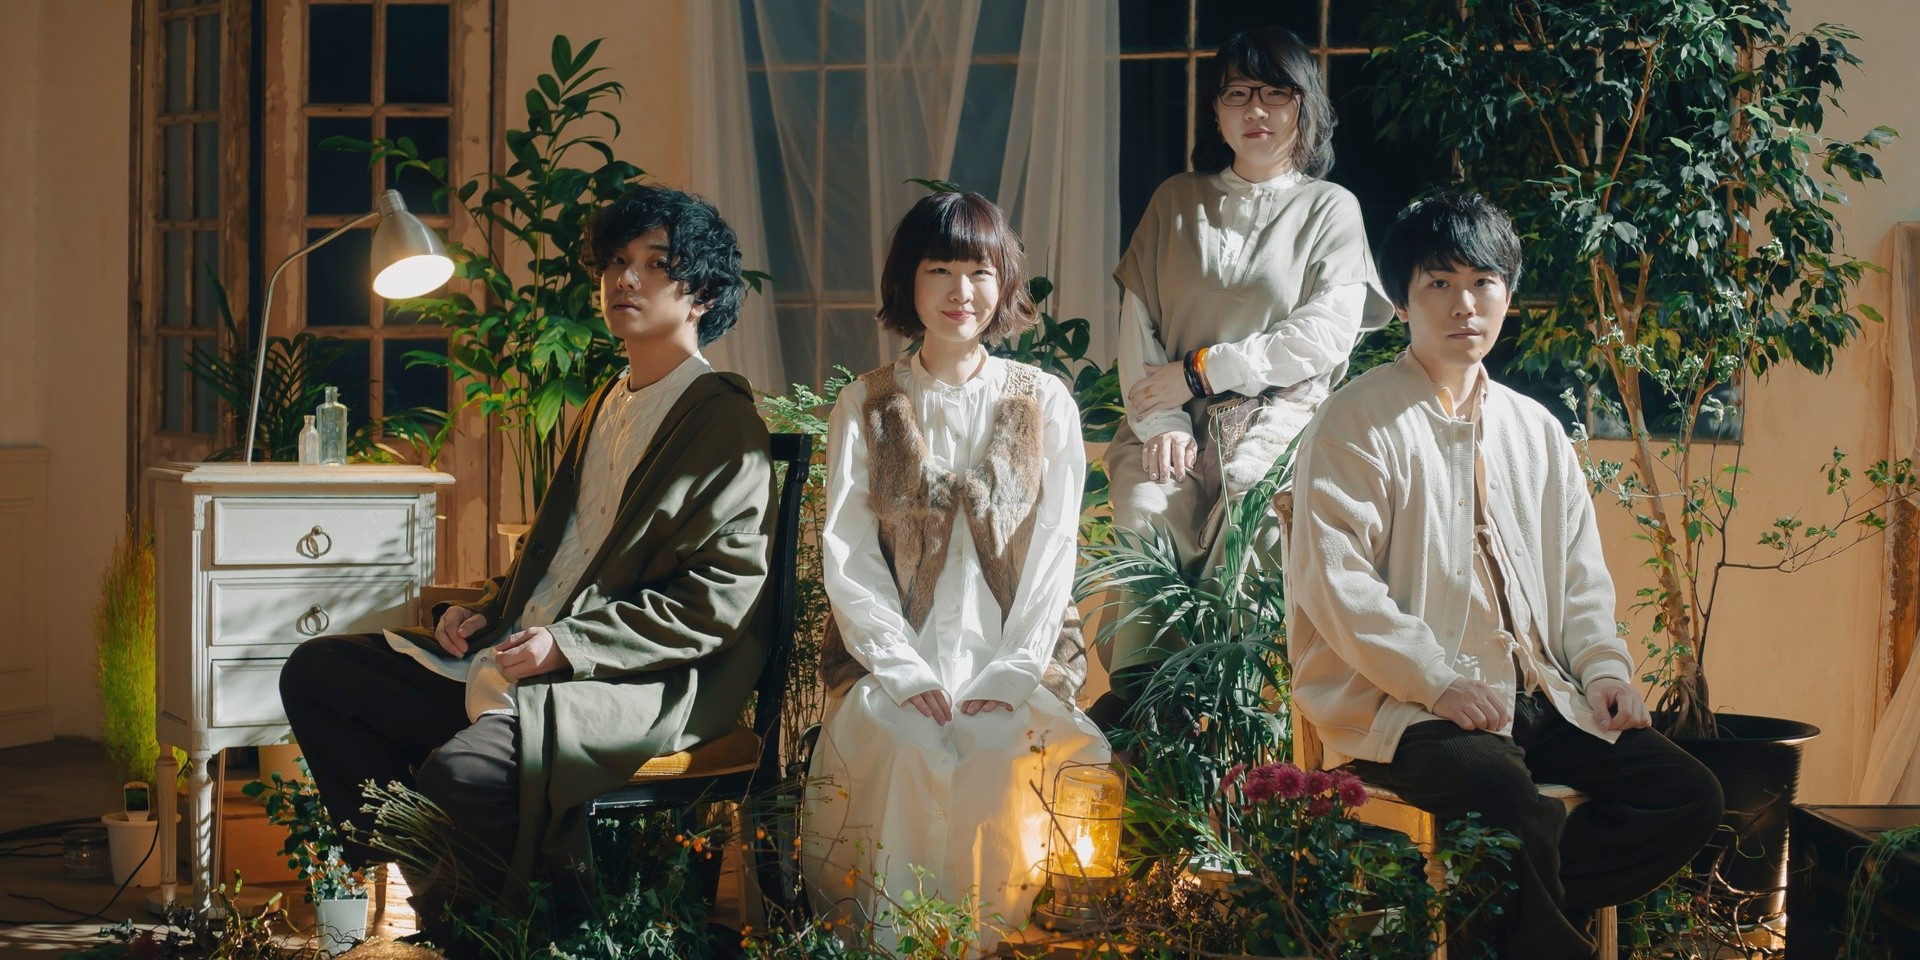 Asia Spotlight: JYOCHO on growing together and finding happiness in their latest album 'Let's Promise to Be Happy'